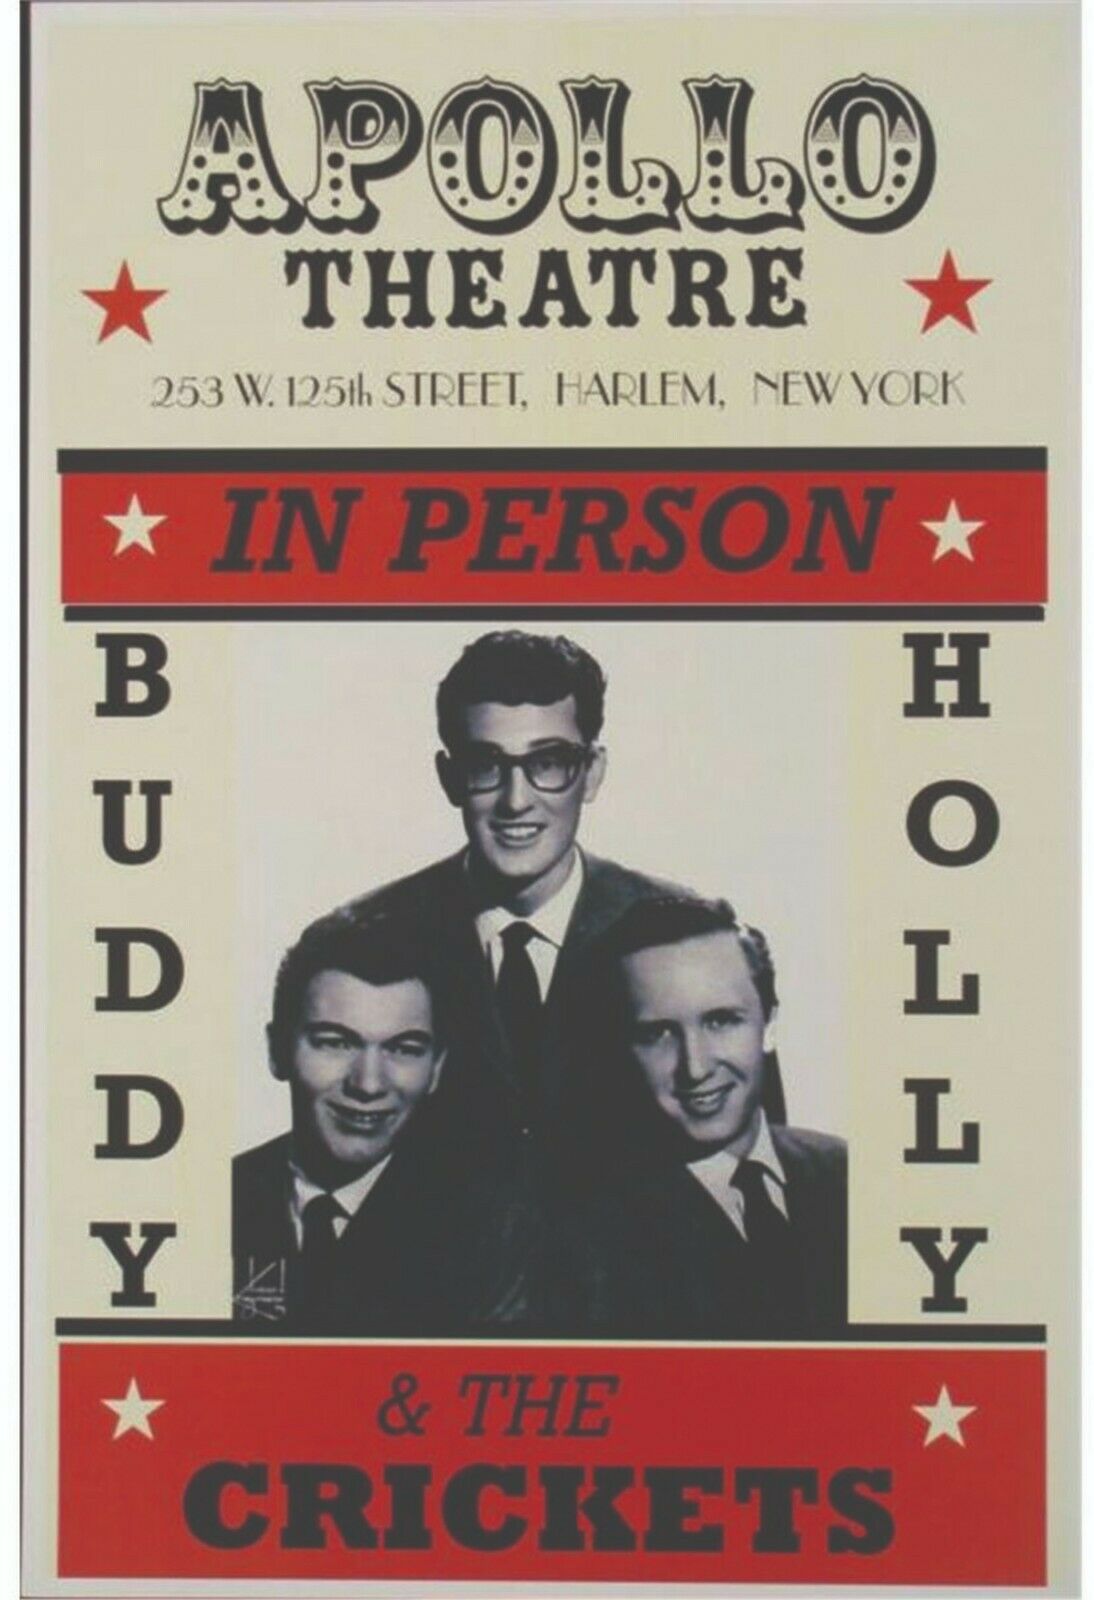 American Singer BUDDY HOLLY Glossy 8x10 Photo Musical Print Poster 